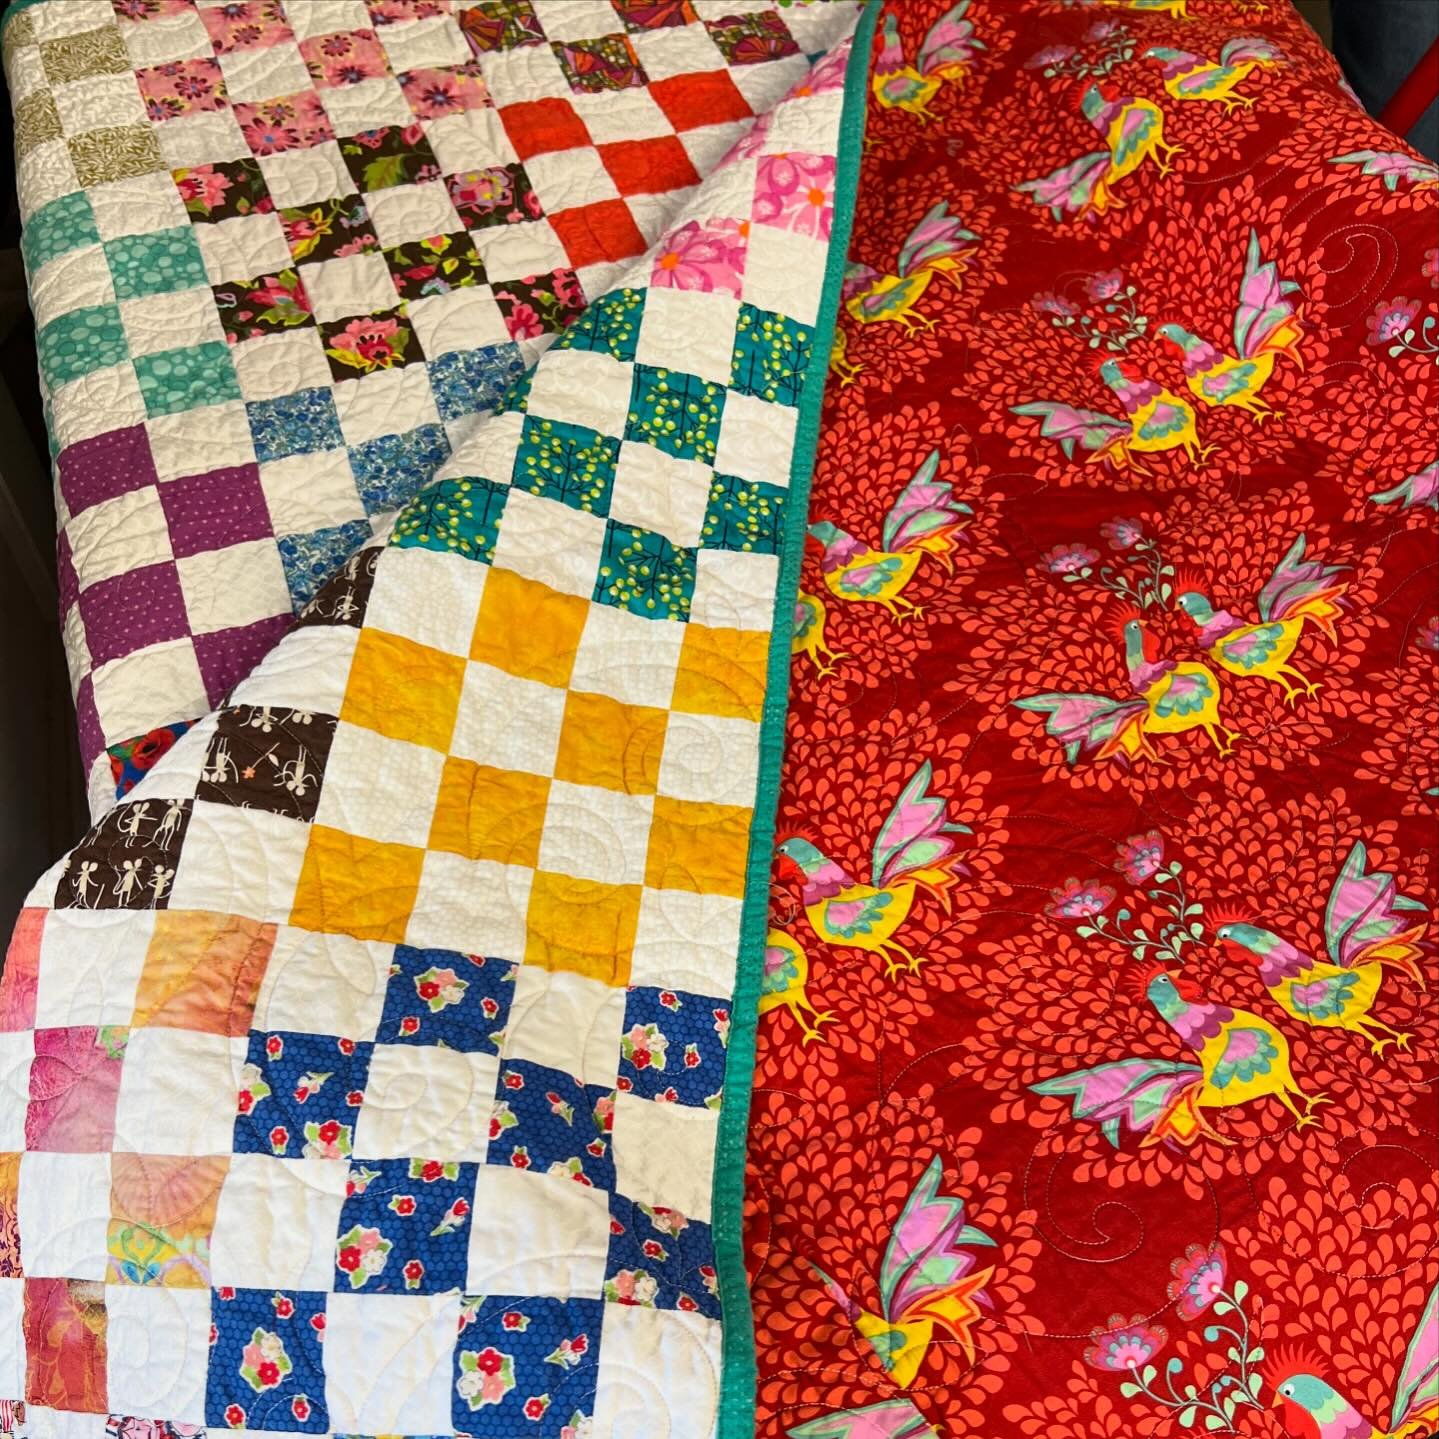 Beth brought in her 16-patch swap quilt - and we are in love! Wouldn&rsquo;t it be fun to do a swap of some sort this summer!?!

#blockswap #strippiecing #quiltlove 

Our shop hours:
Monday-Thursday: 9:30am-8pm
Friday-Saturday: 9:30am-4pm
Sunday: Noo